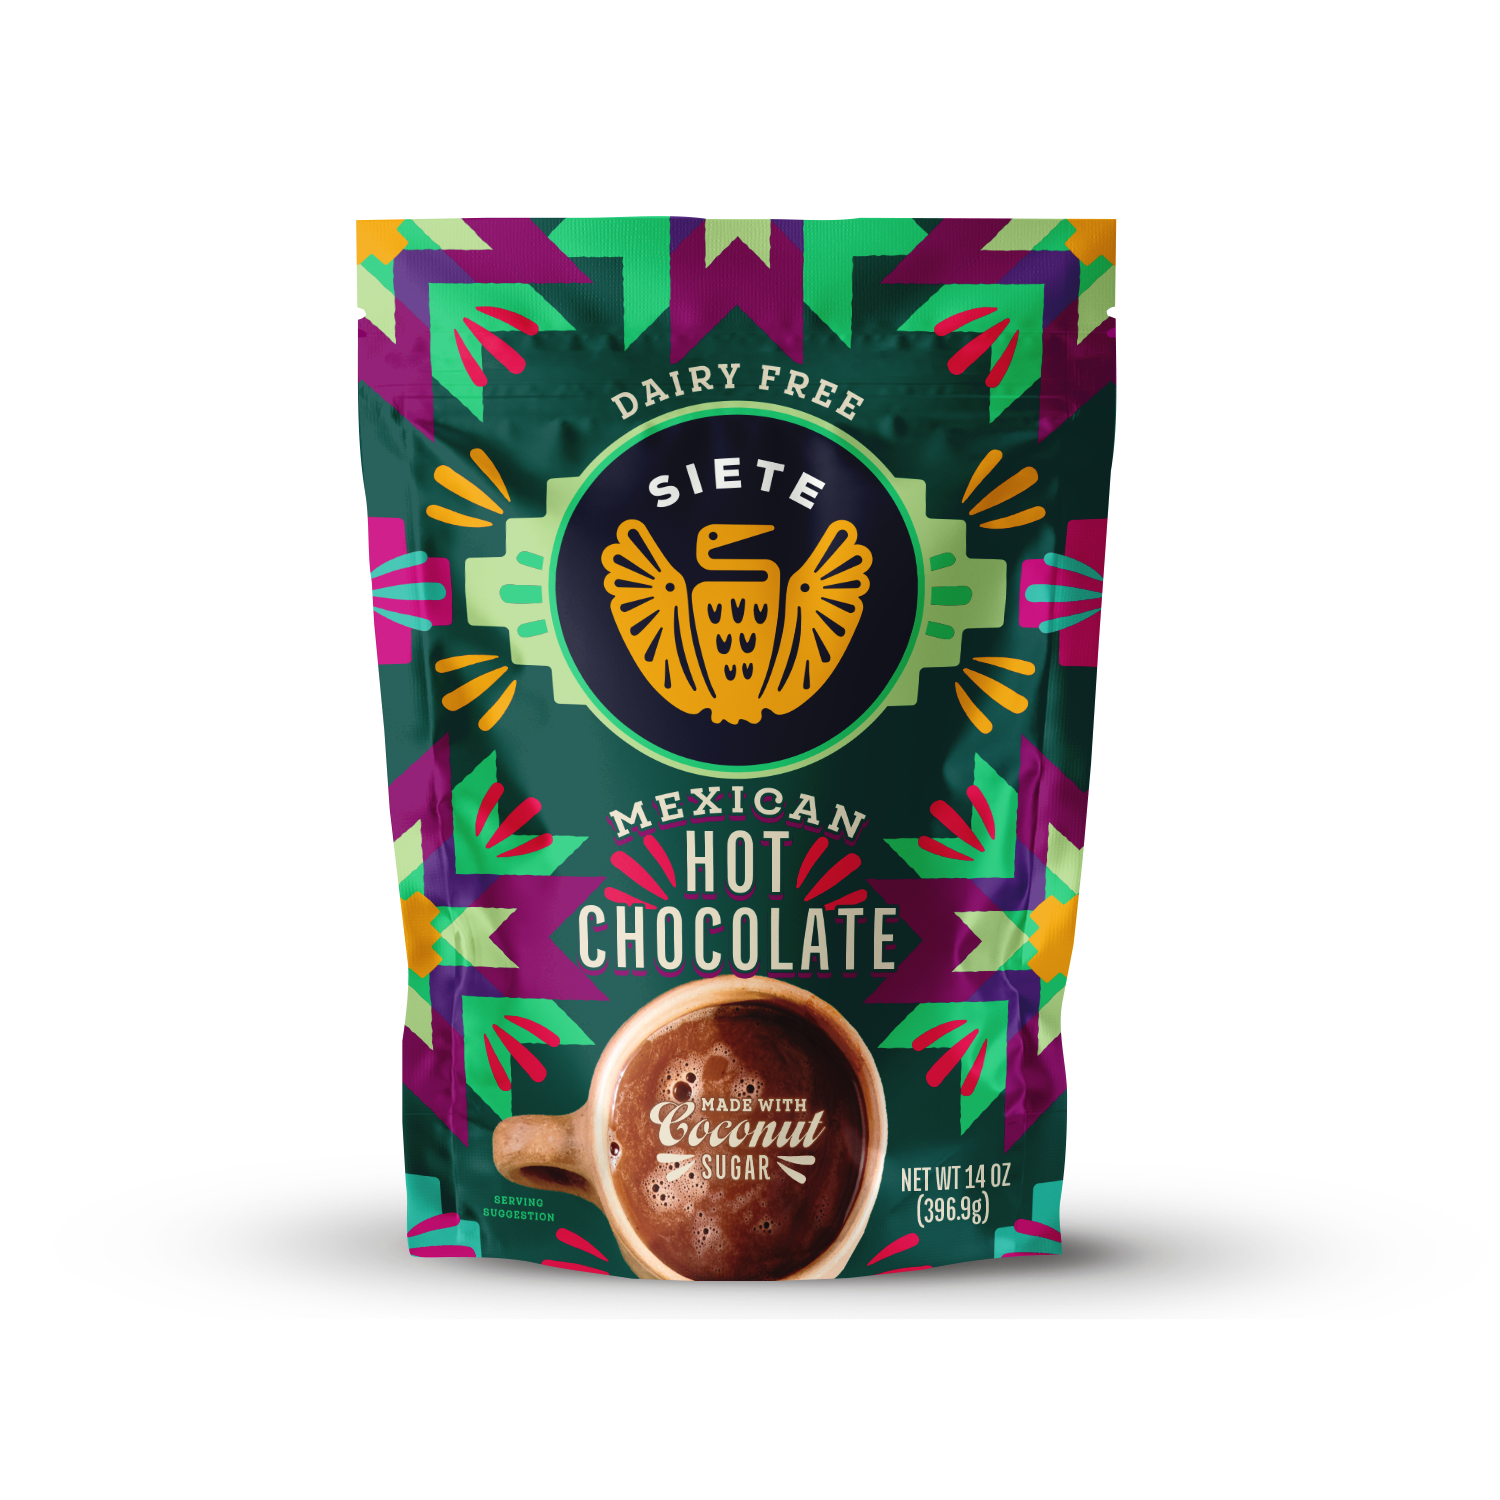 Mexican Hot Chocolate 14oz - 2 Bags